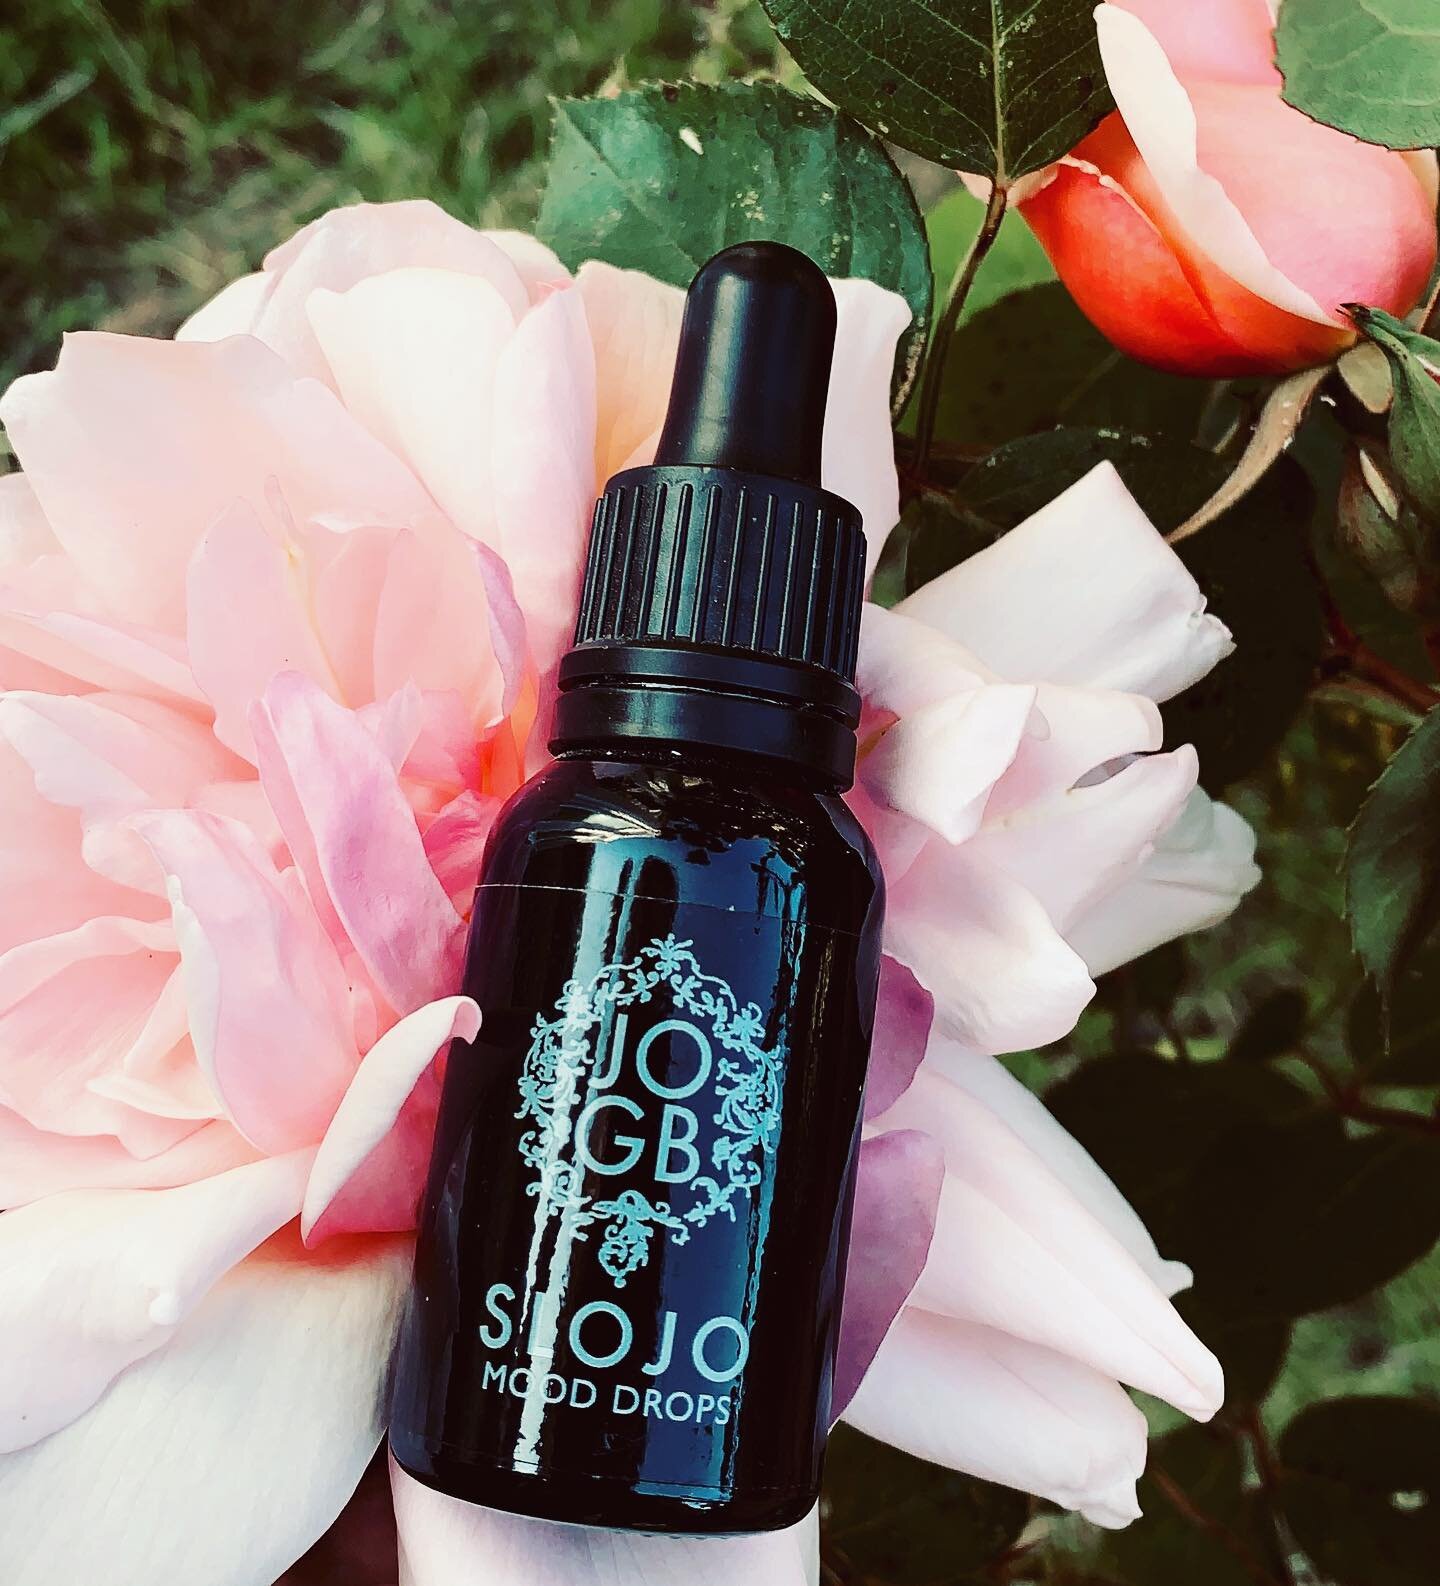 Rosa damascena is at the core of every JOGB aromatherapy blend. An ancient holy plant, it has a multitude of therapeutic properties, recognised in modern medicine too, from anti-depressant, anti-inflammatory, antimicrobial, and antioxidant, to analge